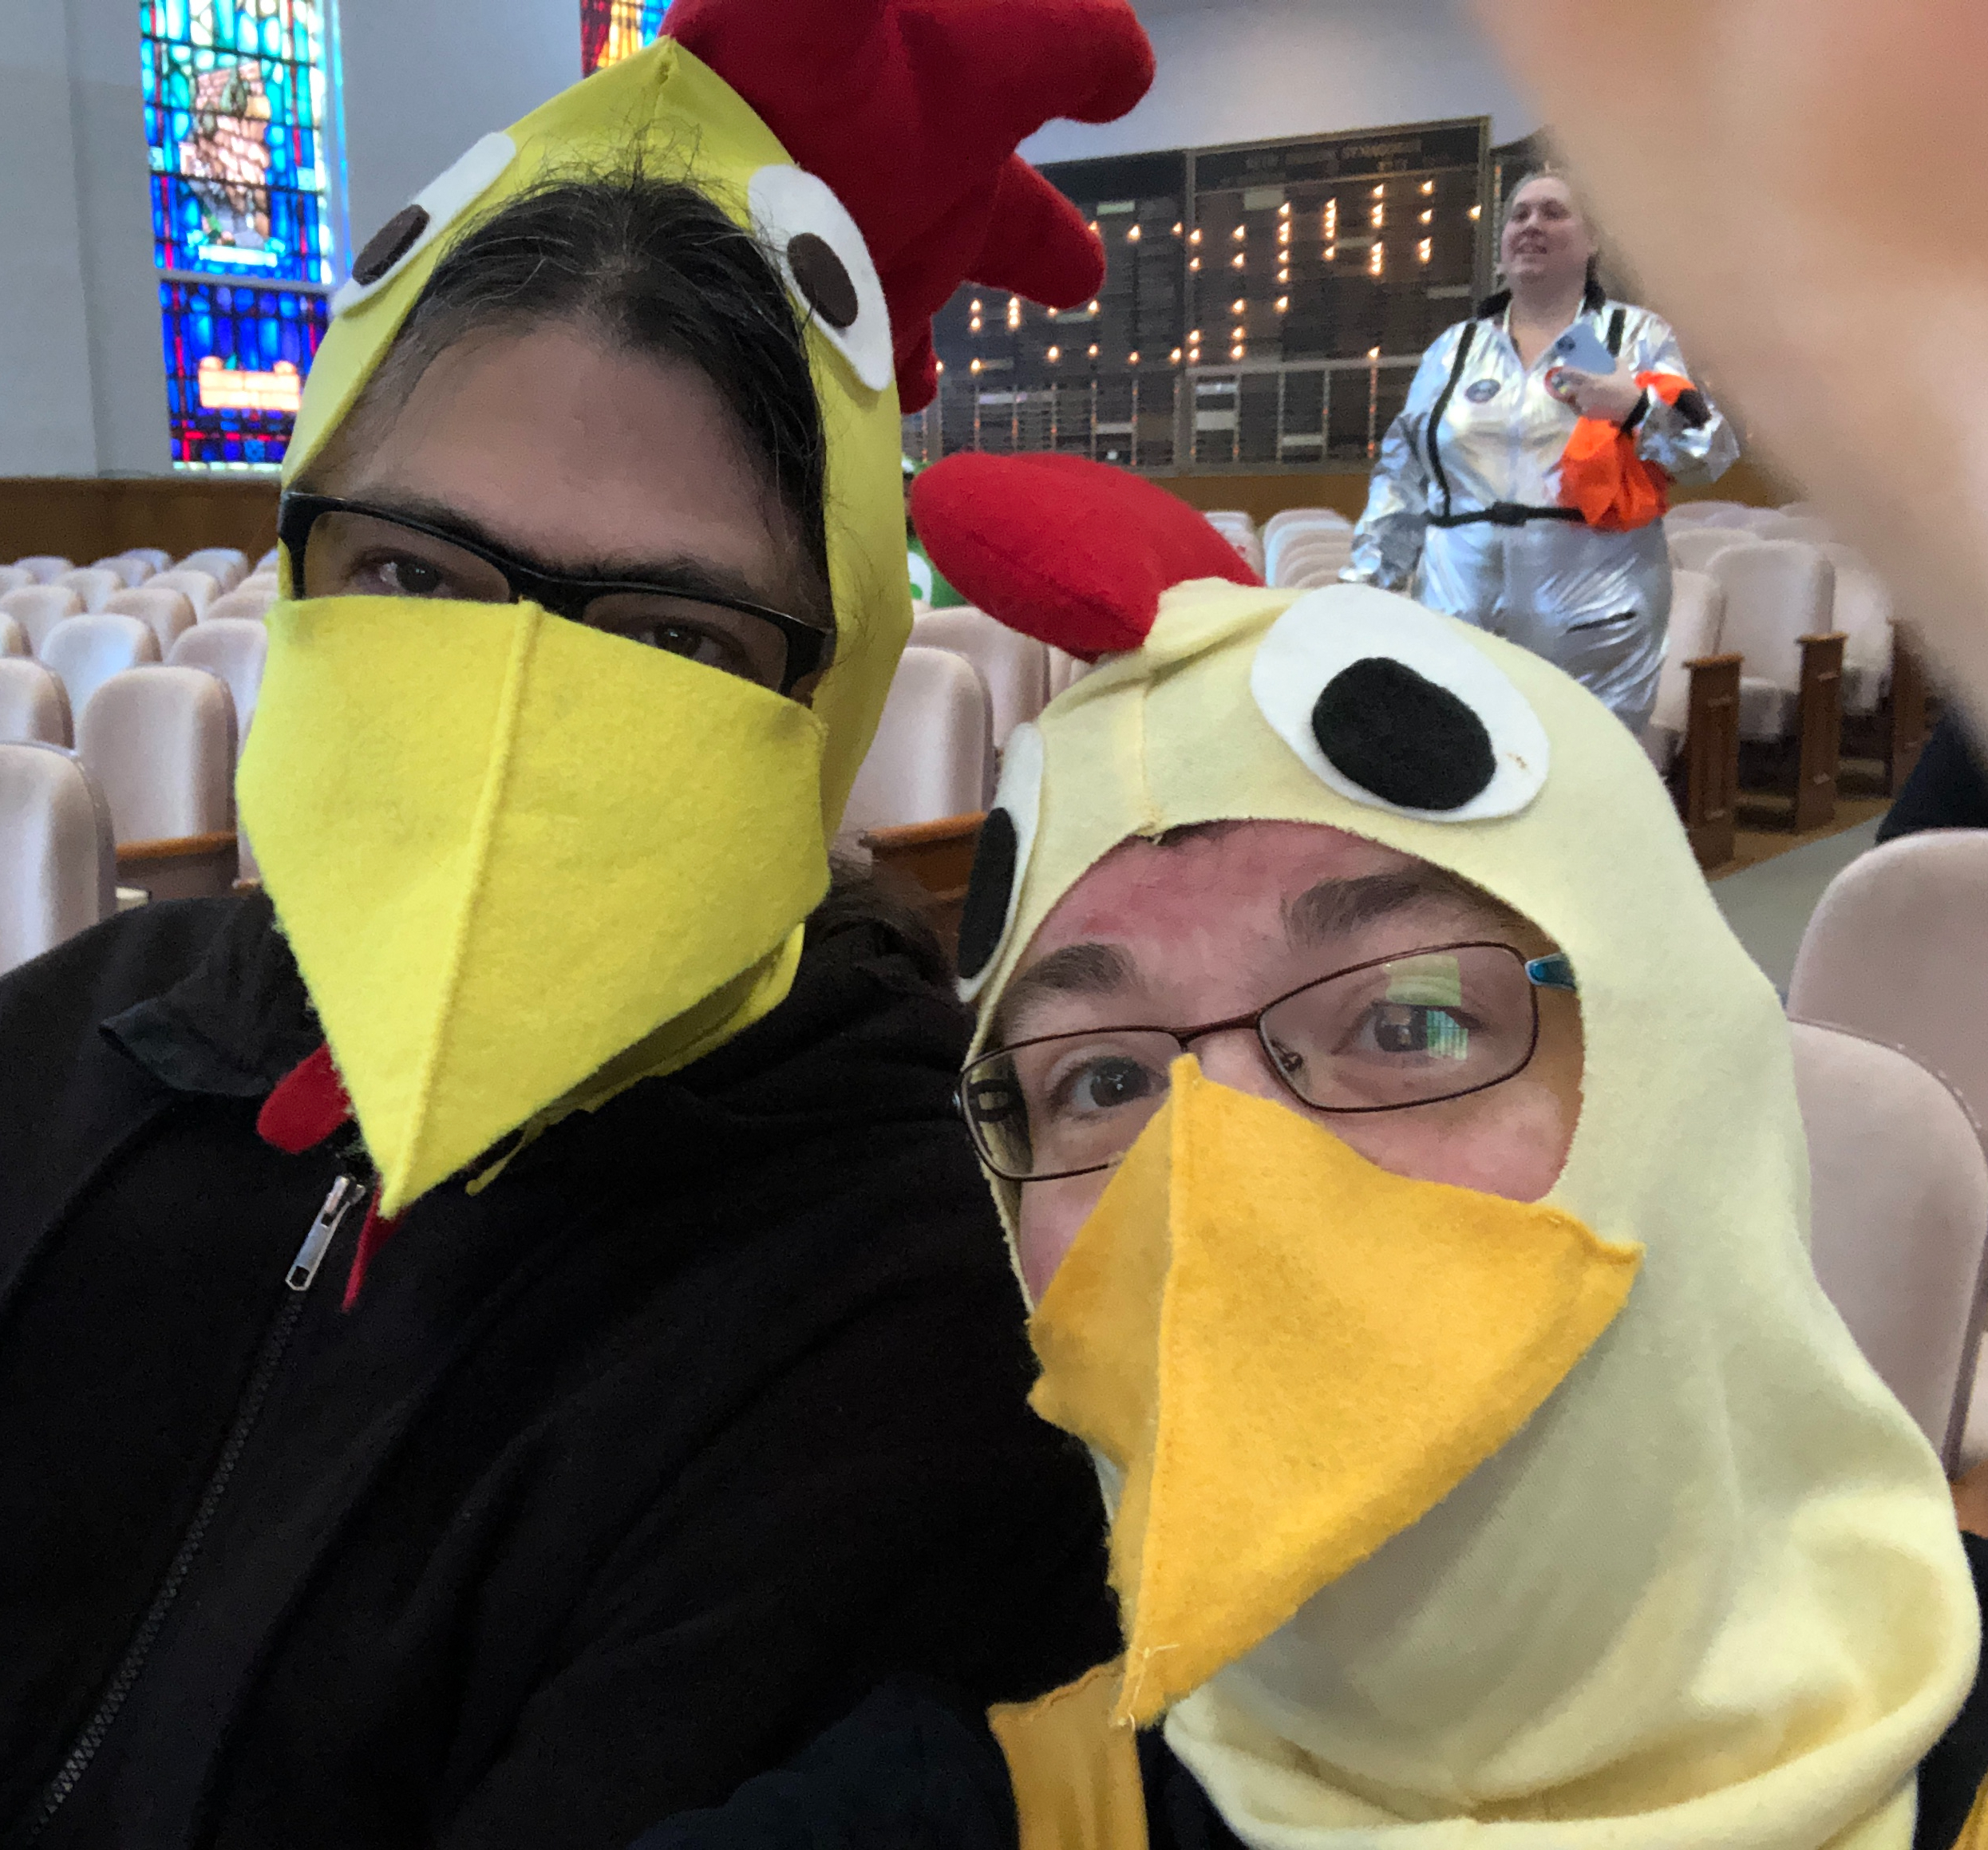 Selfie of me and Mr. December both wearing chicken costumes.